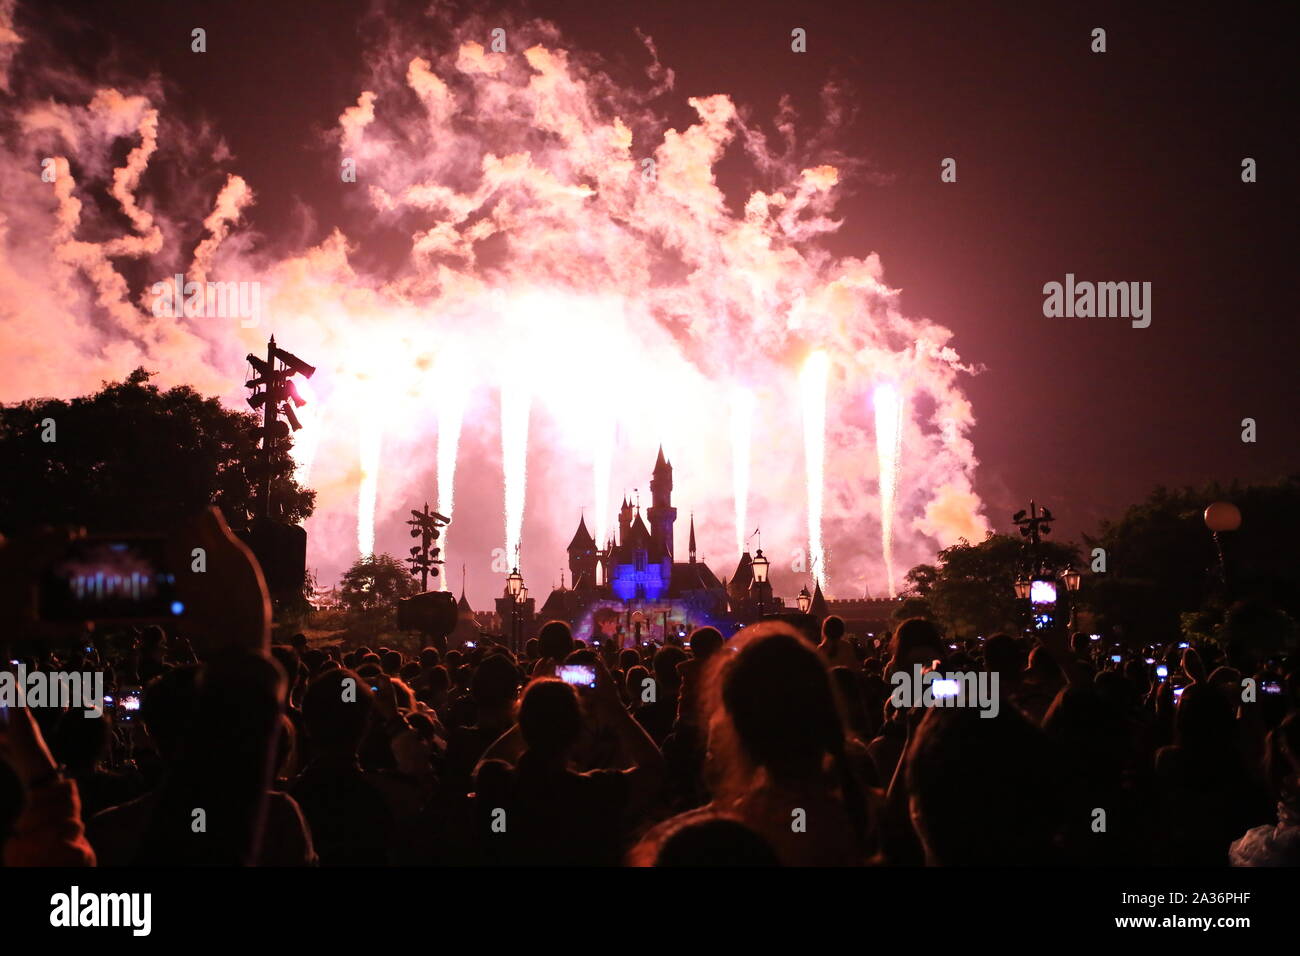 Disneyland Paris Castle at Night during the Dreams Show Editorial Stock  Image - Image of christmas, florida: 58790319